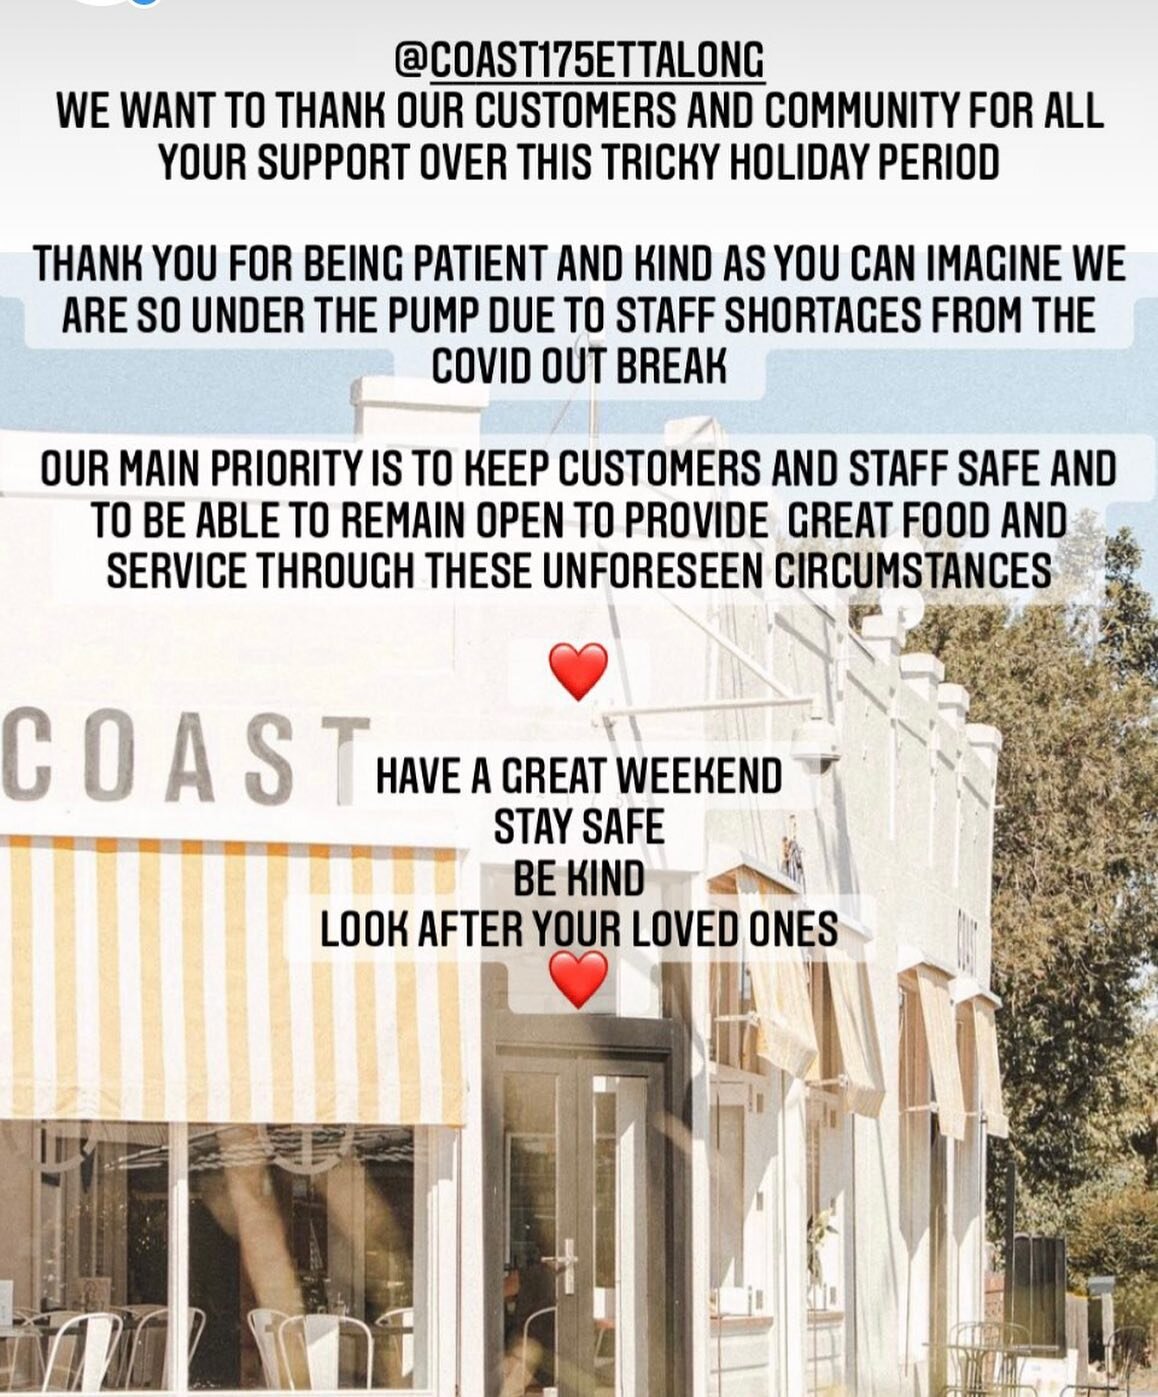 To all the hospitality and food supply industry ❤️Stay positive and safe.
We will get through these unexpected circumstances 🙏❤️